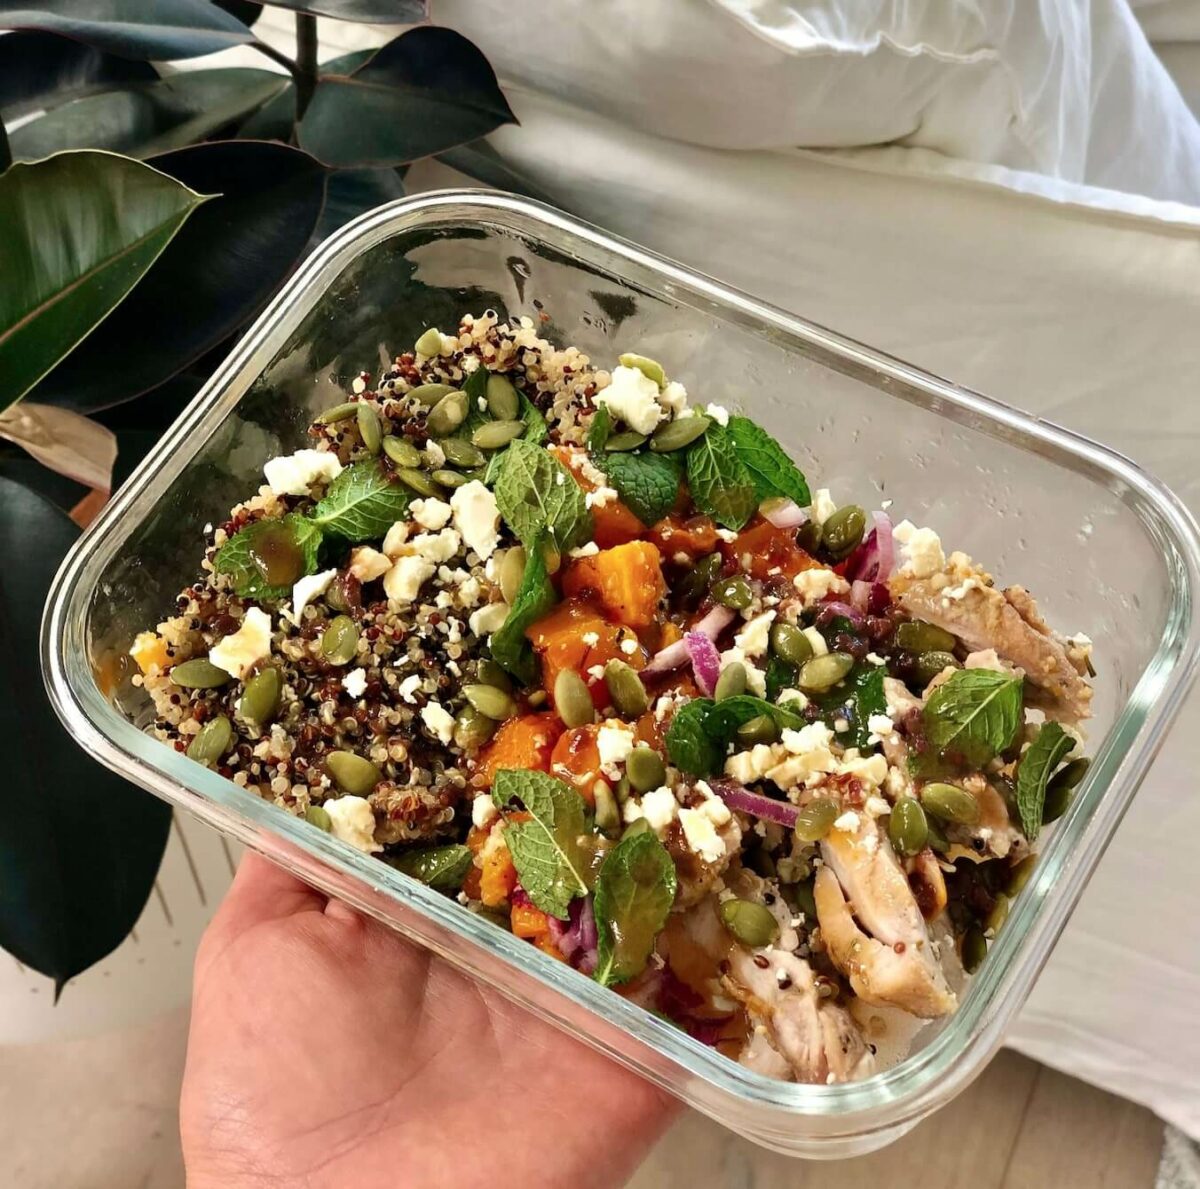 Pictured: My Quinoa Pumpkin salad from Back to Basics 